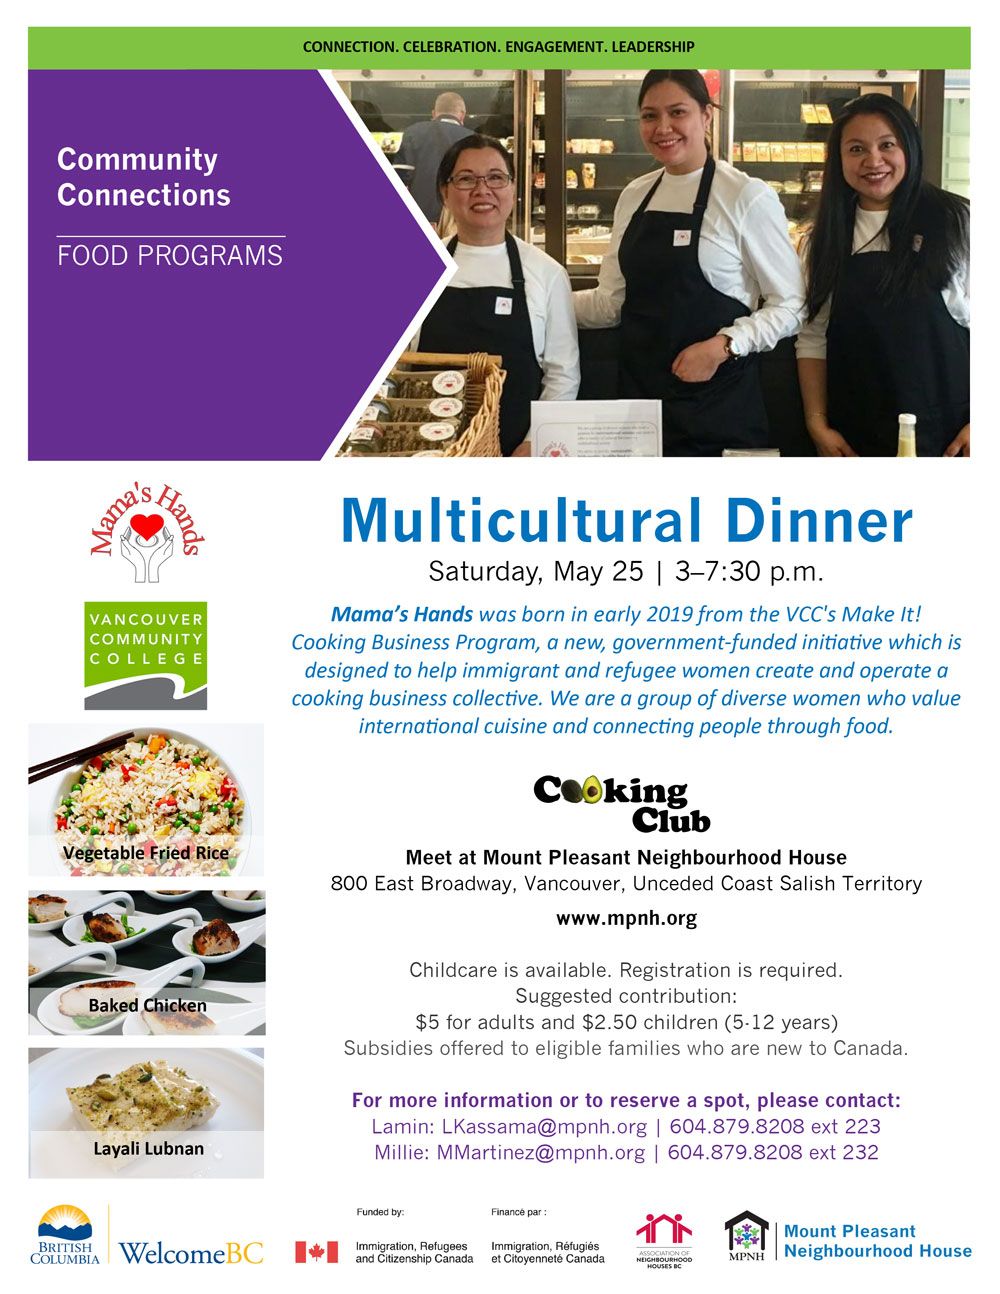 An image of the poster with event details, featuring a photo of three women in aprons in a commercial kitchen, smiling at the camera.